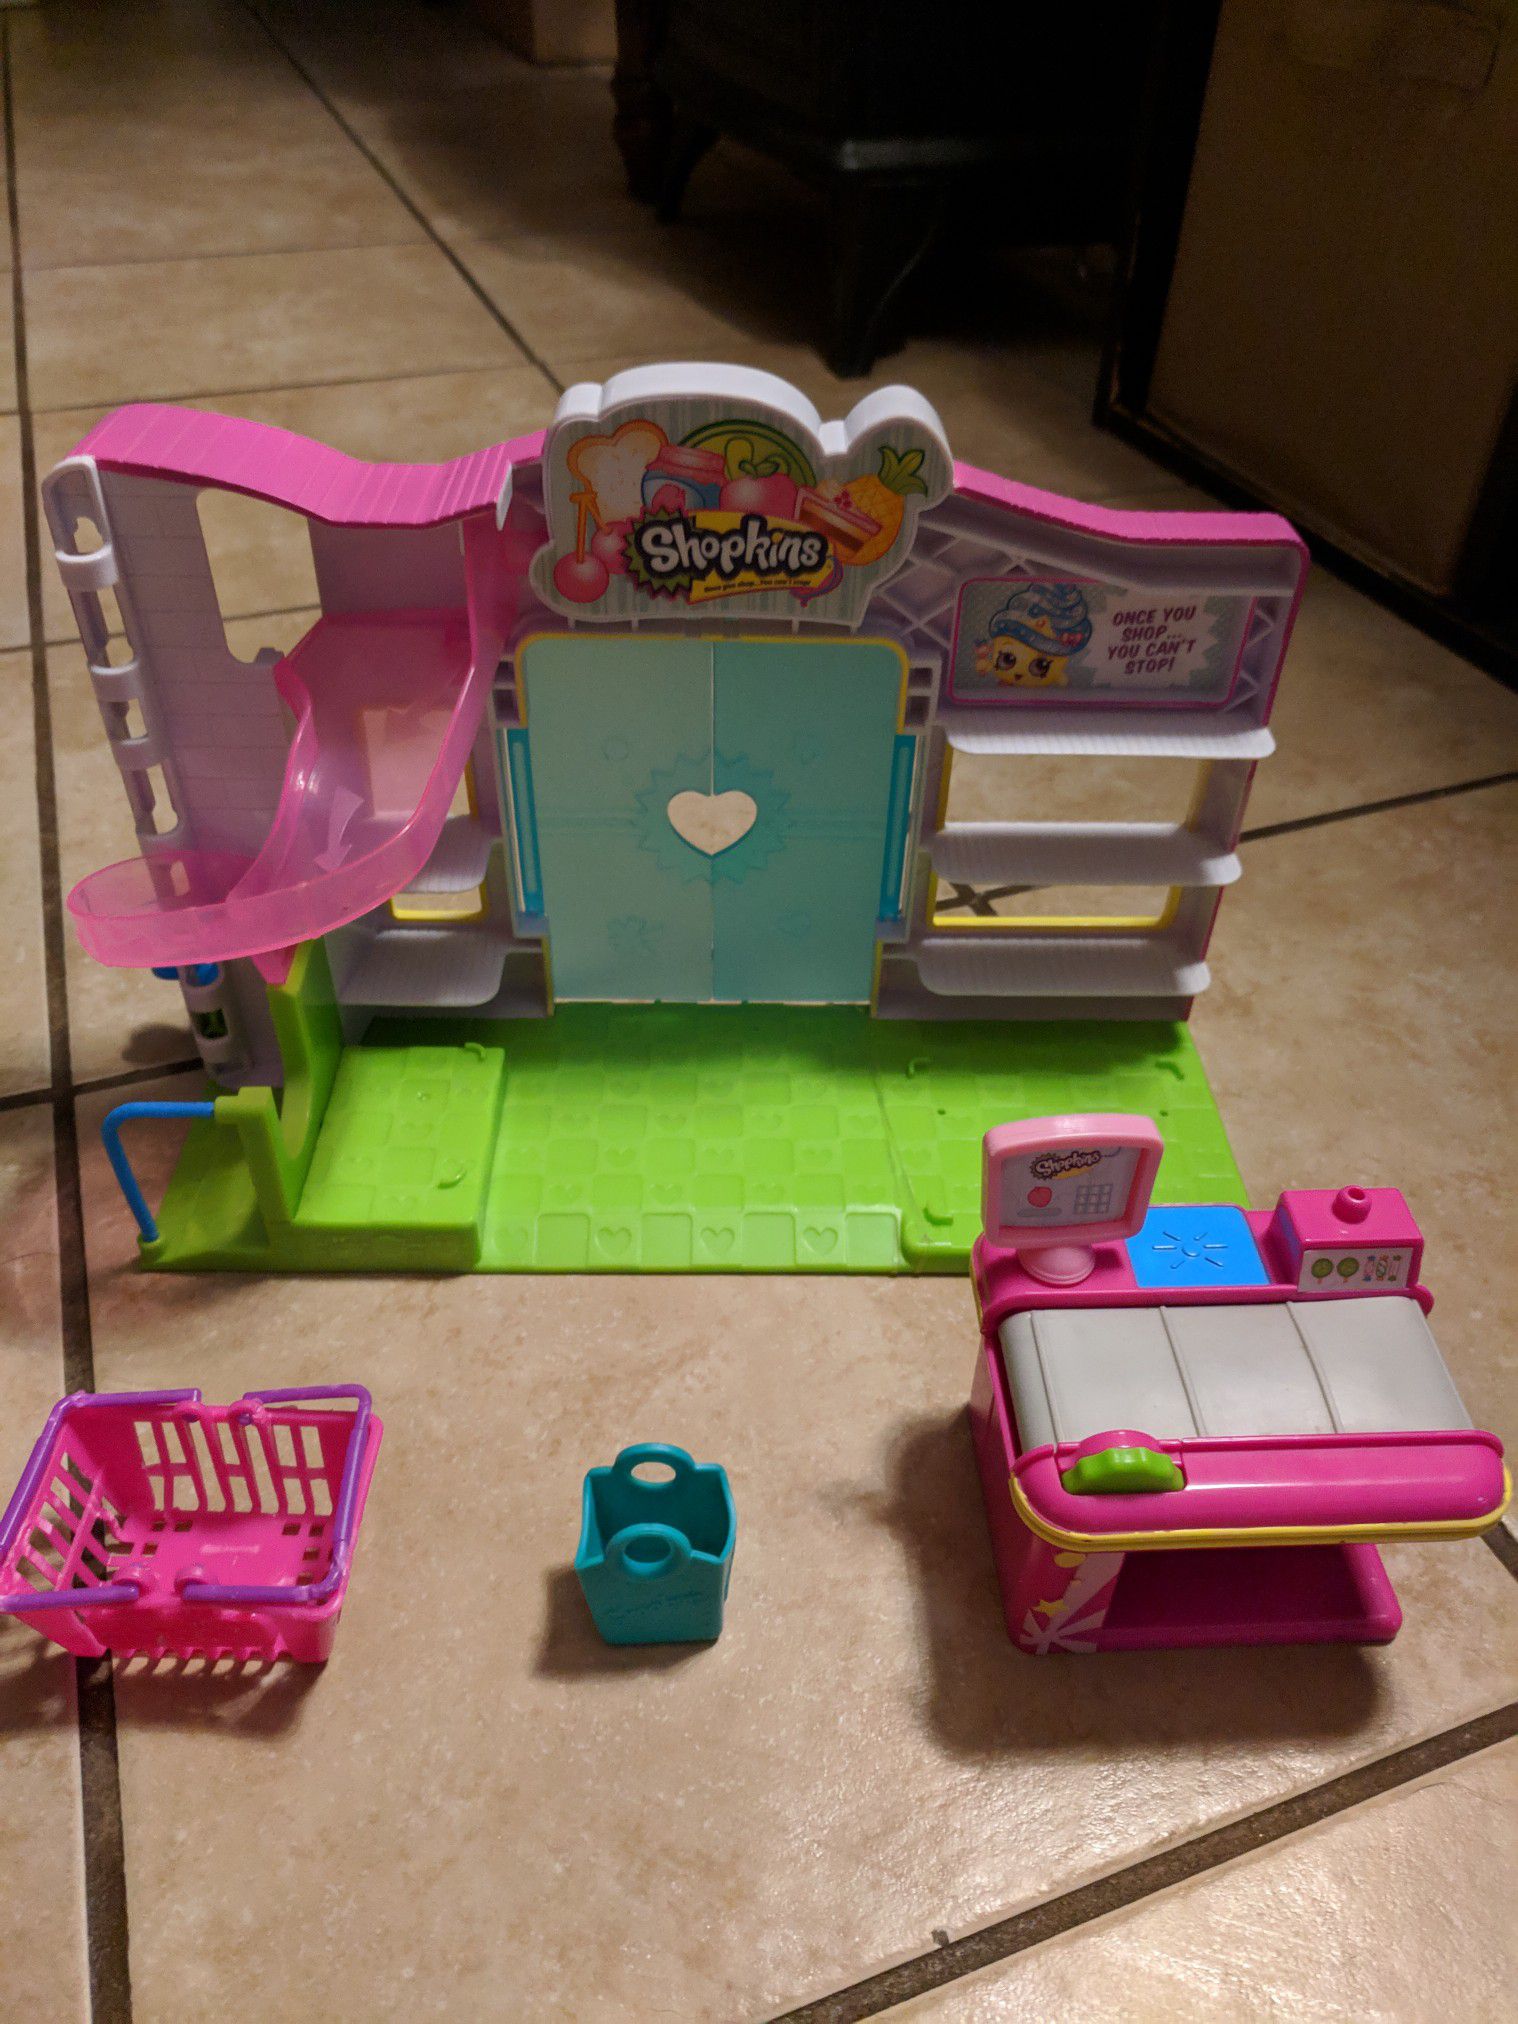 Shopkins Small Mart toy set by Moose toys